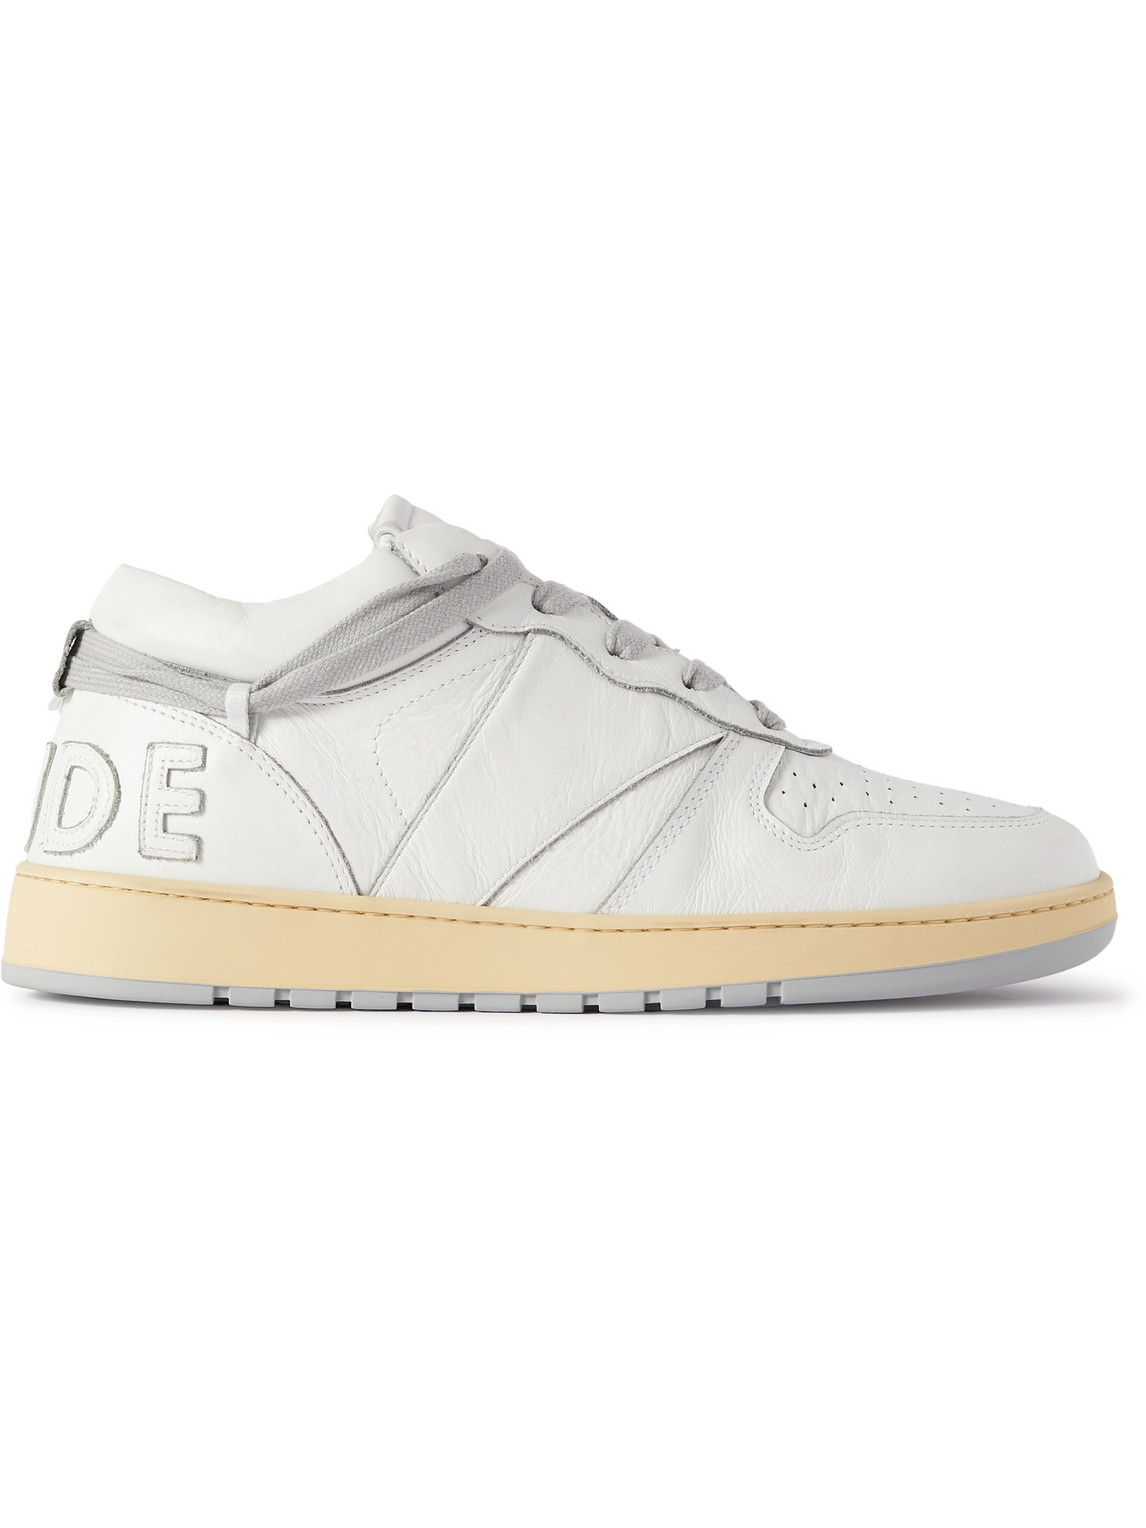 Rhude Rhecess Distressed Leather Trainers In White